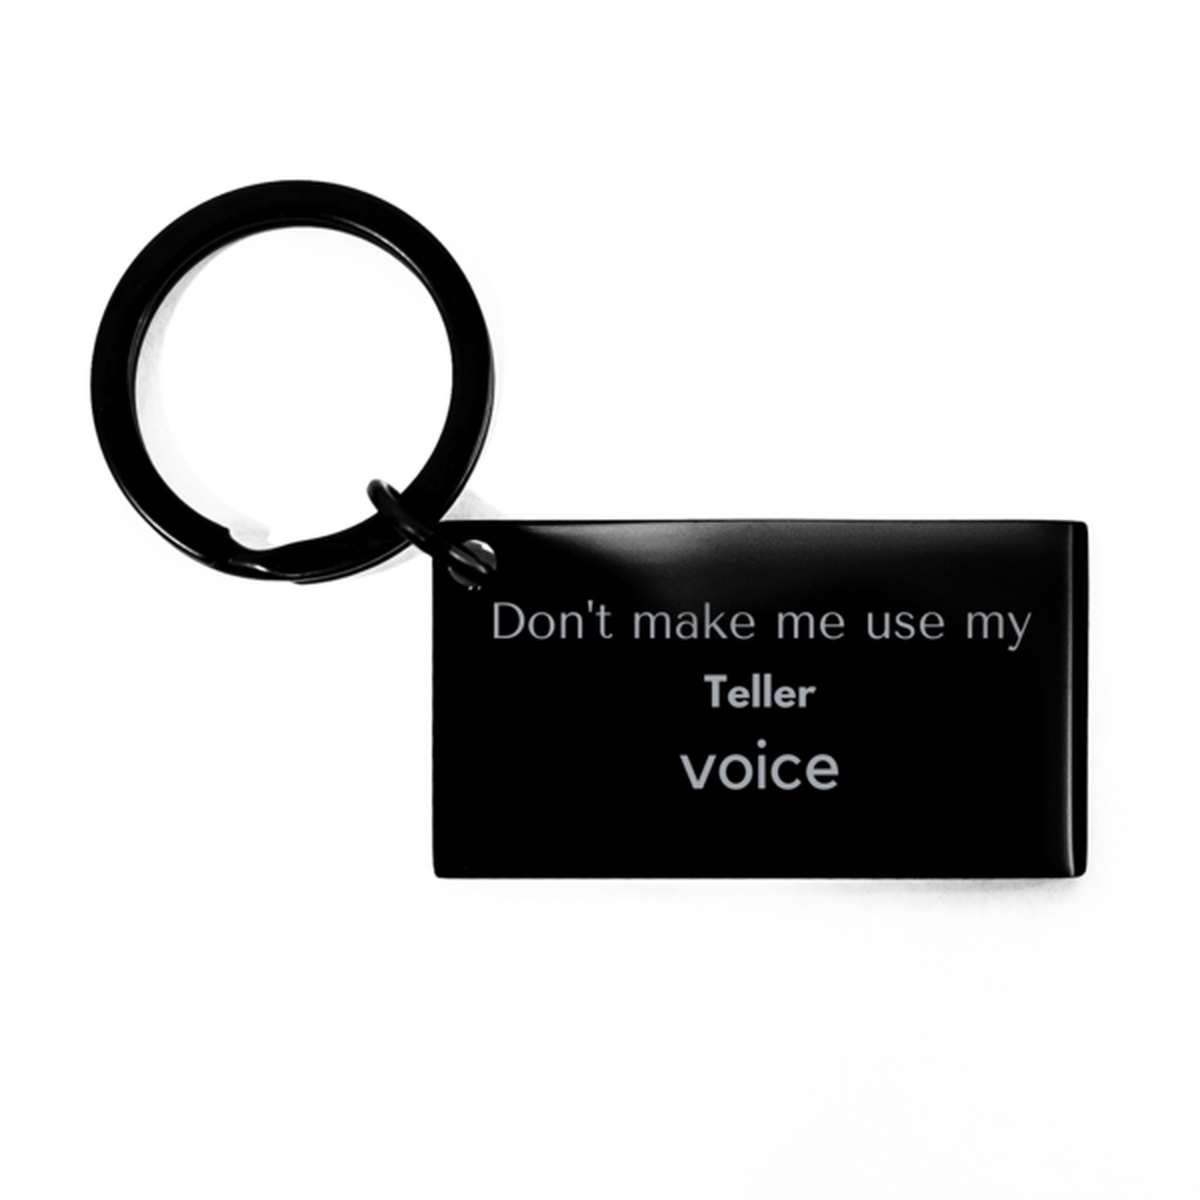 Don't make me use my Teller voice, Sarcasm Teller Gifts, Christmas Teller Keychain Birthday Unique Gifts For Teller Coworkers, Men, Women, Colleague, Friends